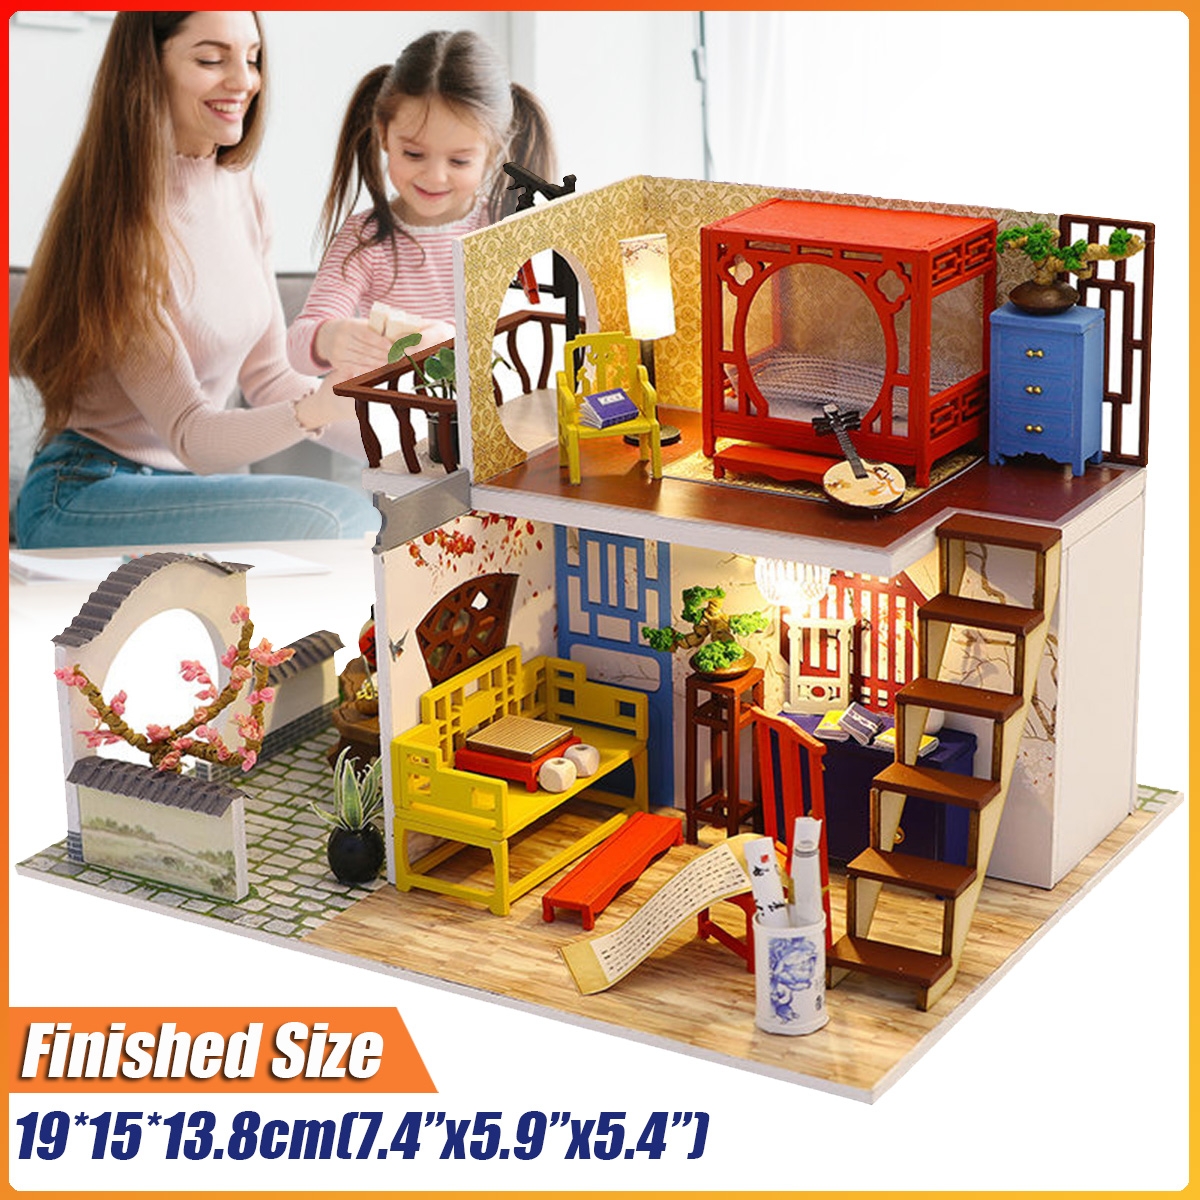 1:24 Wooden DIY Handmade Assemble Doll House Miniature Furniture Kit Education Toy with LED Light for Kids Gift